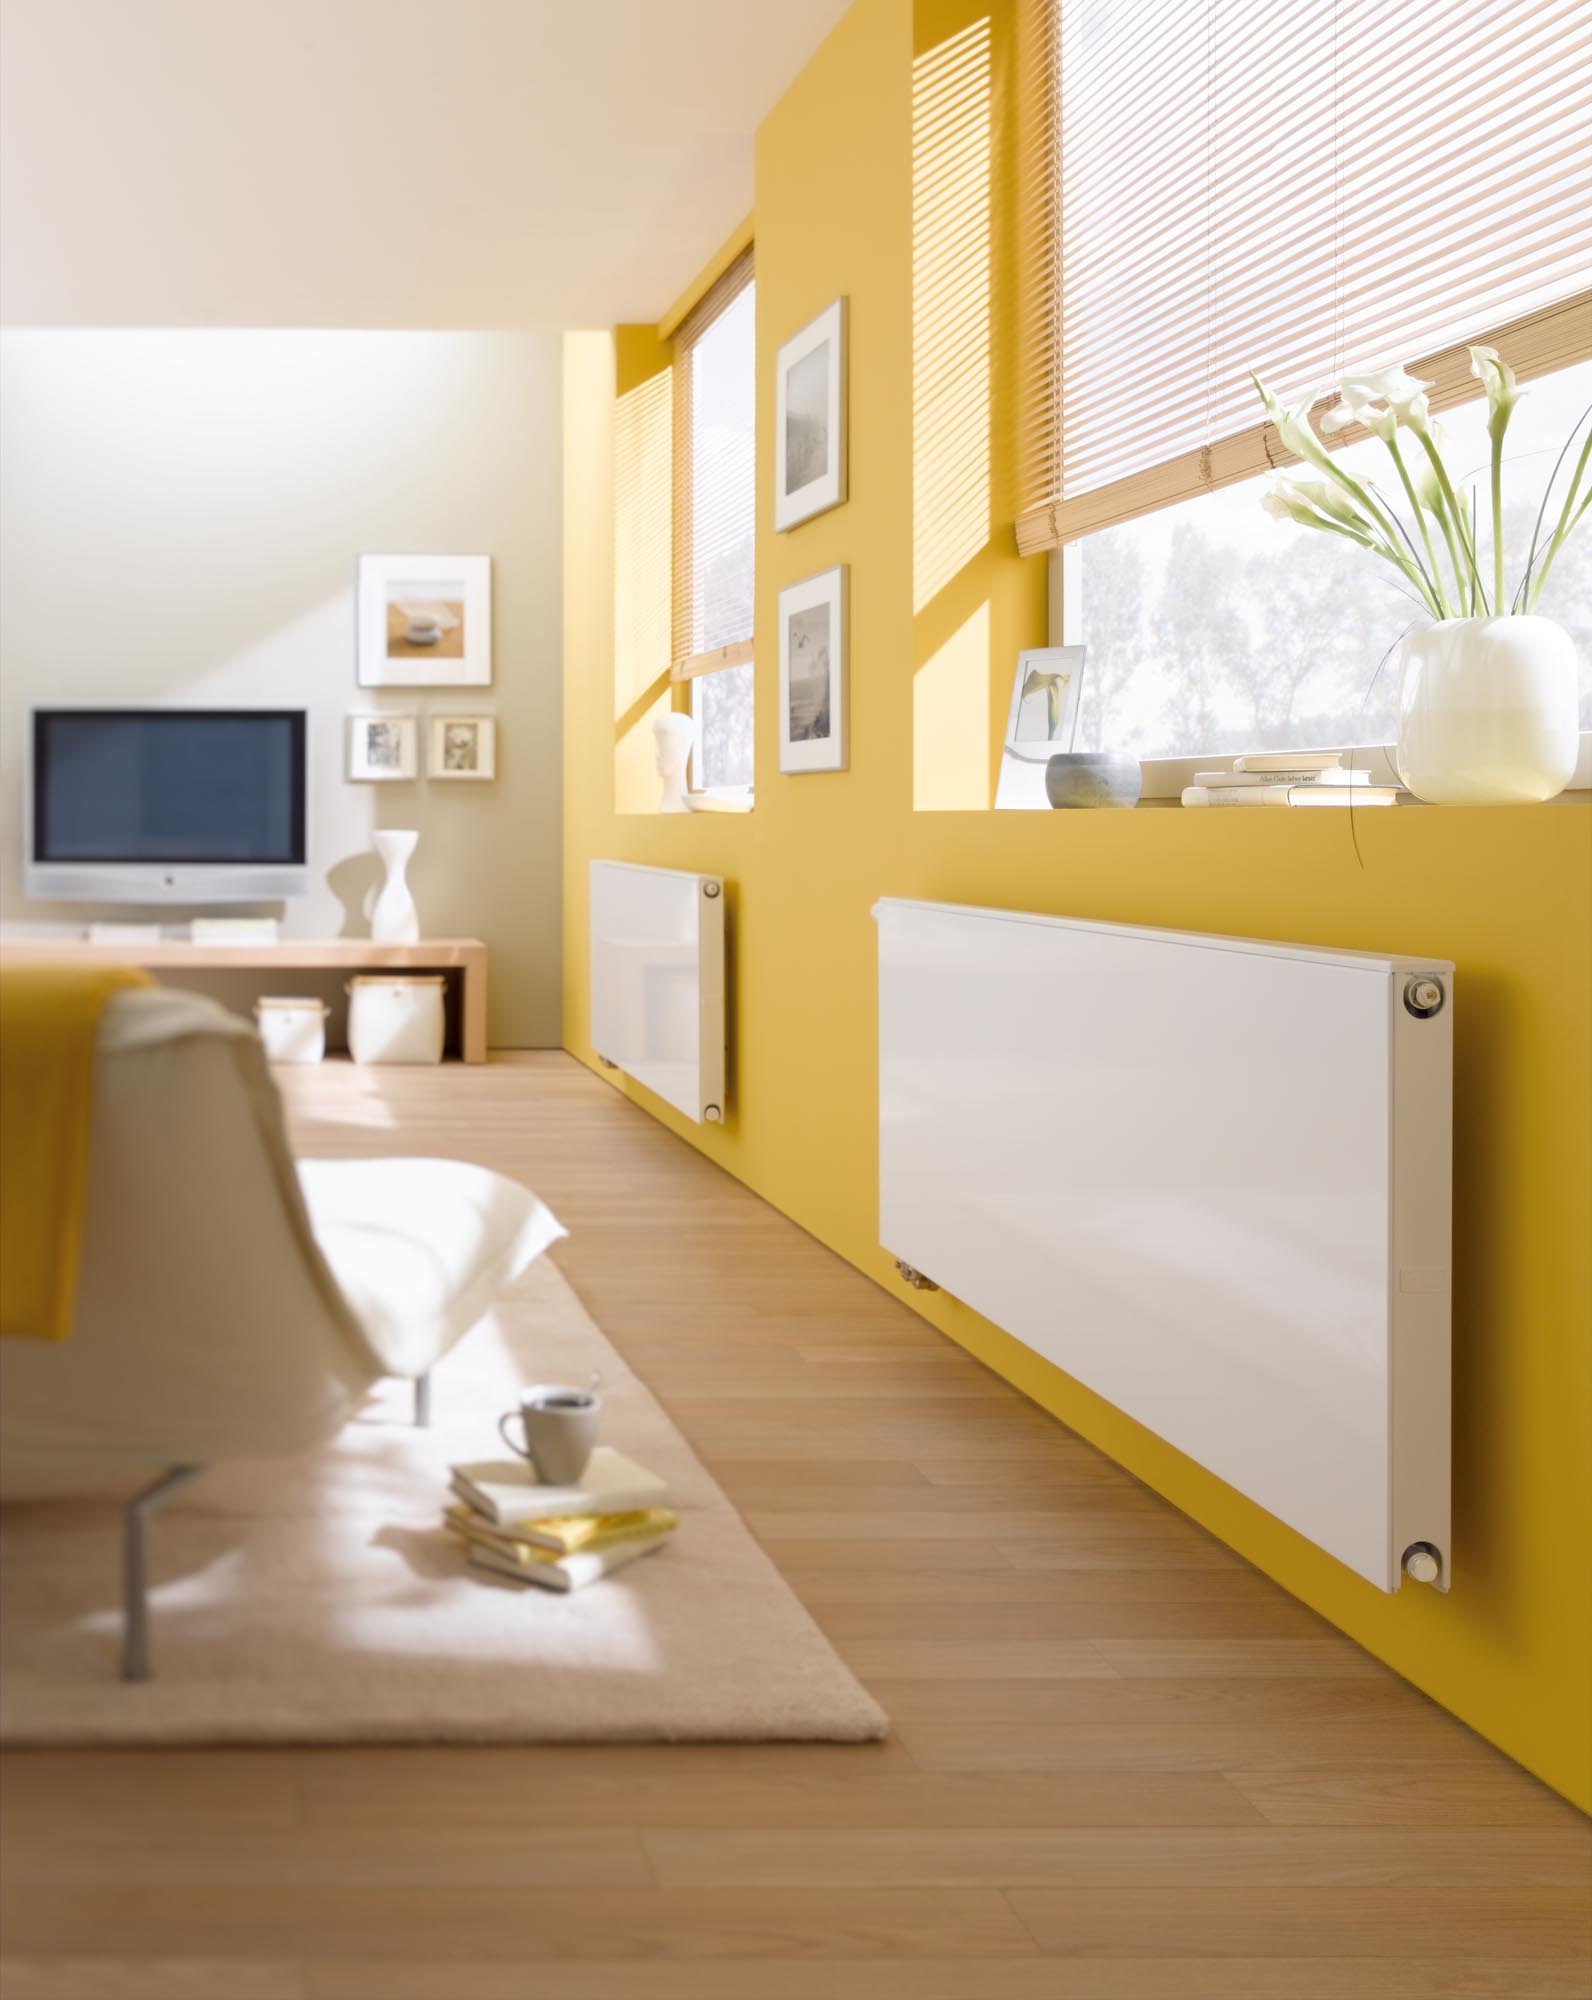 Kermi therm-x2 Plan steel panel radiators – powerful with a smooth design.